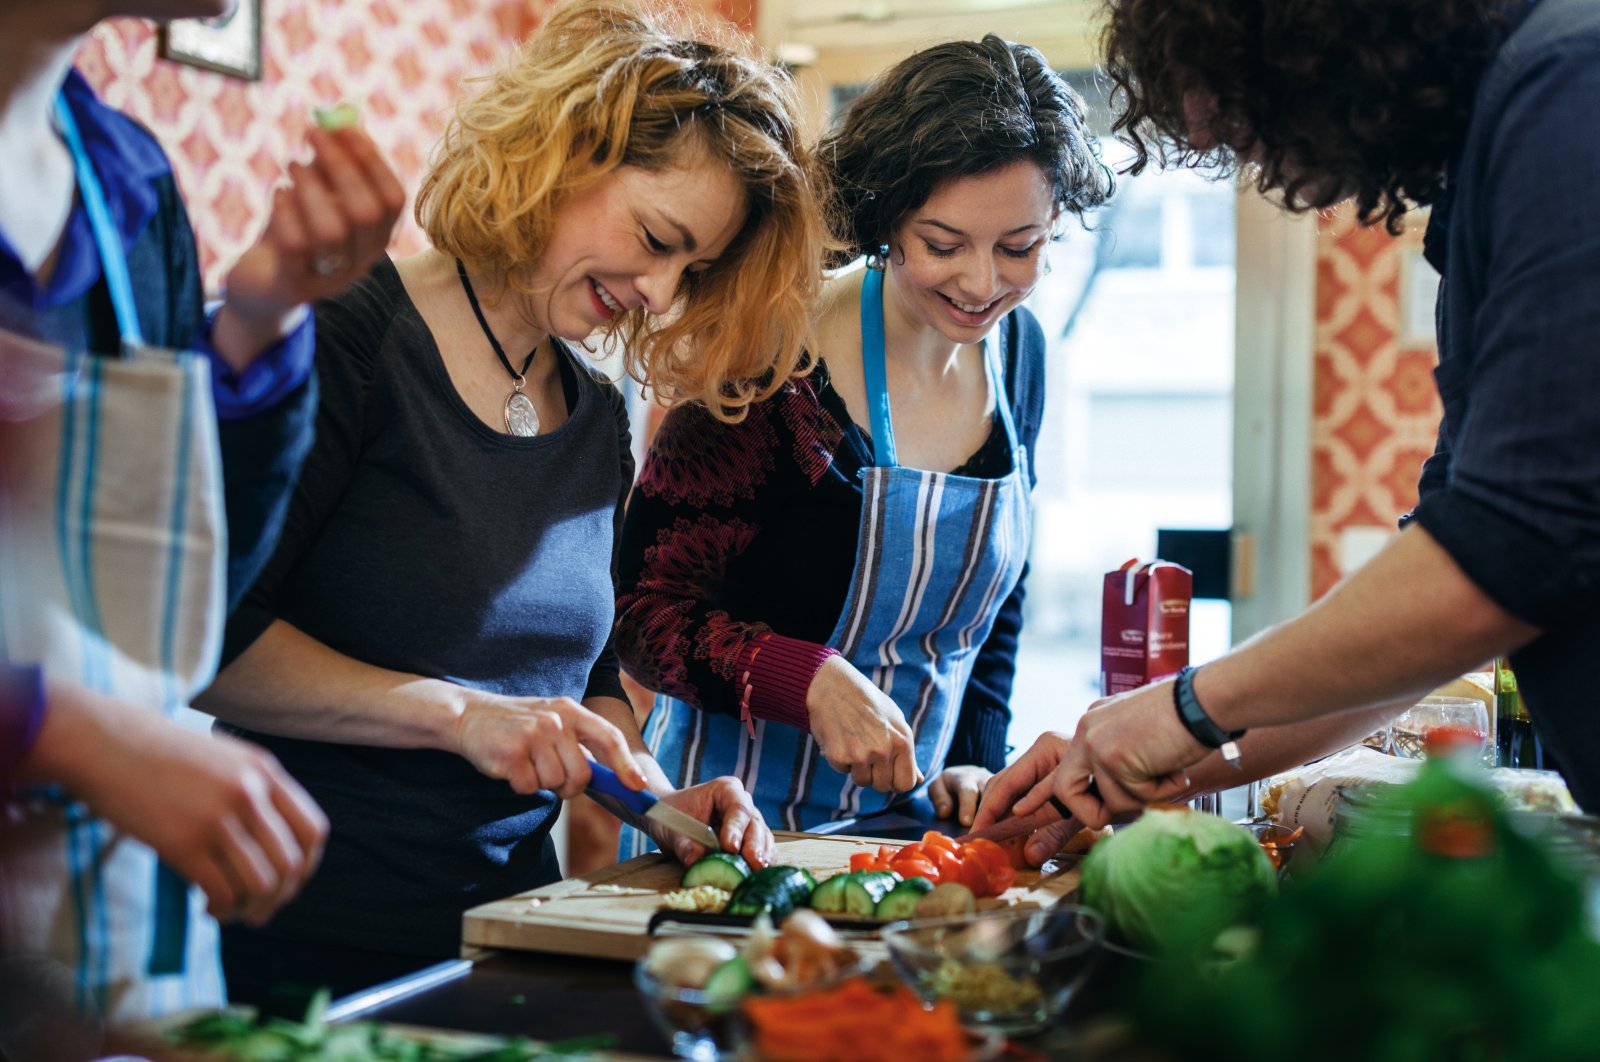 Participants of a cooking class enjoy cutting vegetables. (Getty Images Photo)